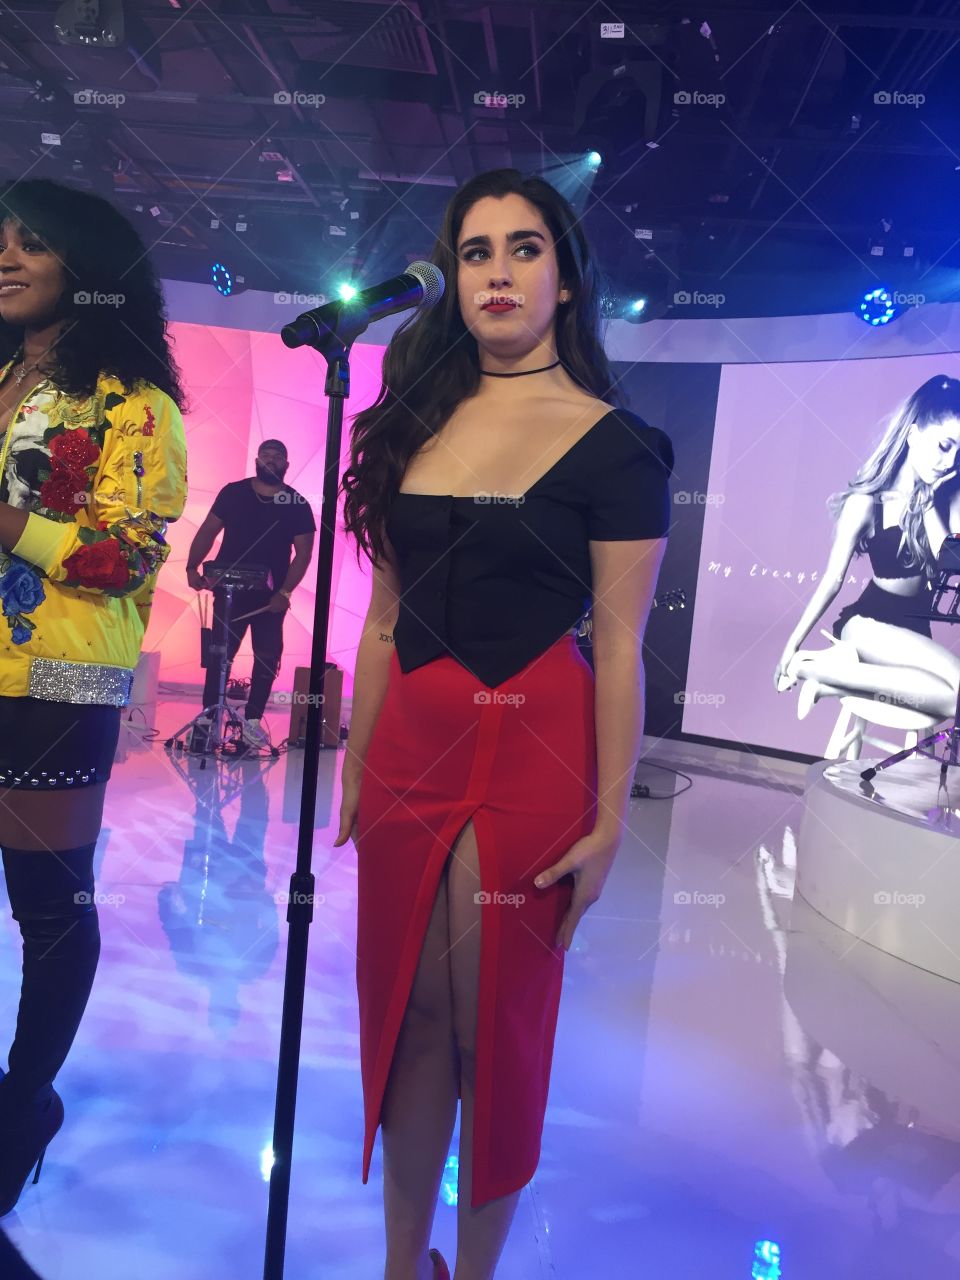 when i saw lauren from fifth harmony at trl ♥️